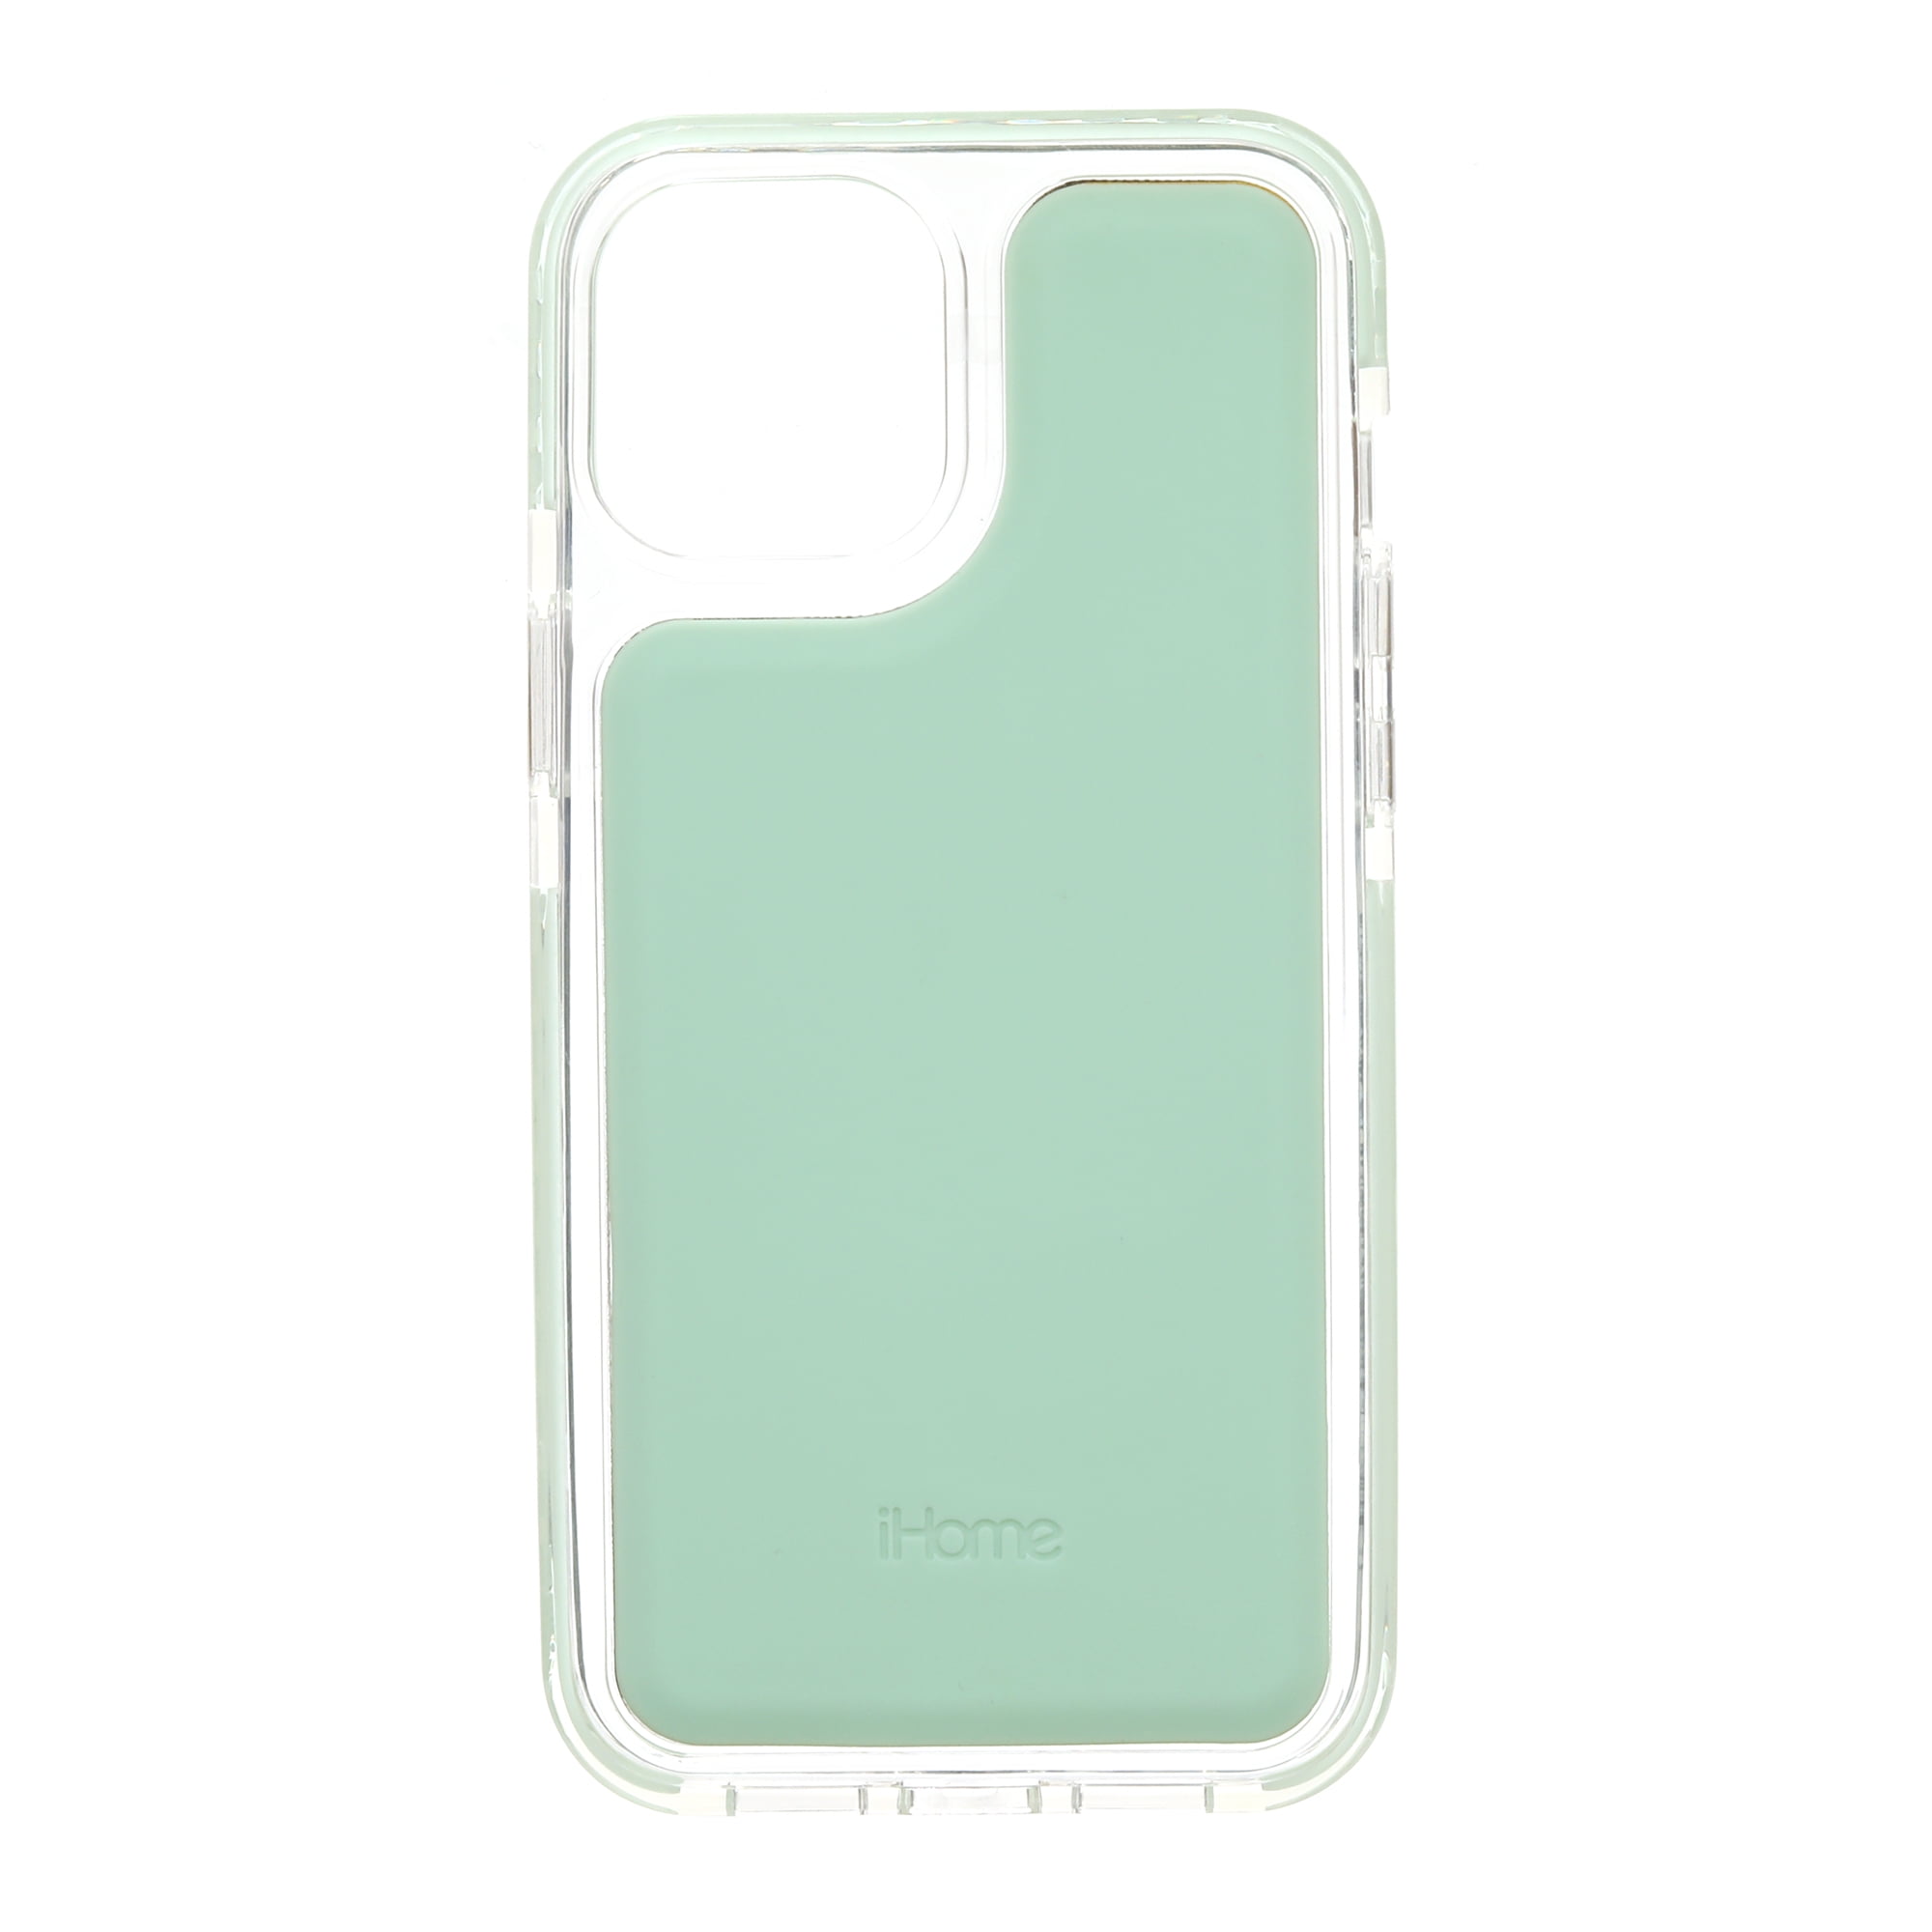 Ihome Iphone 12 Pro Max Phone Case Premium Silicone Lightweight Ultra Slim Shock Absorbent Velo Protective Case Wireless Charging Compatible Mint Green Walmart Com Walmart Com